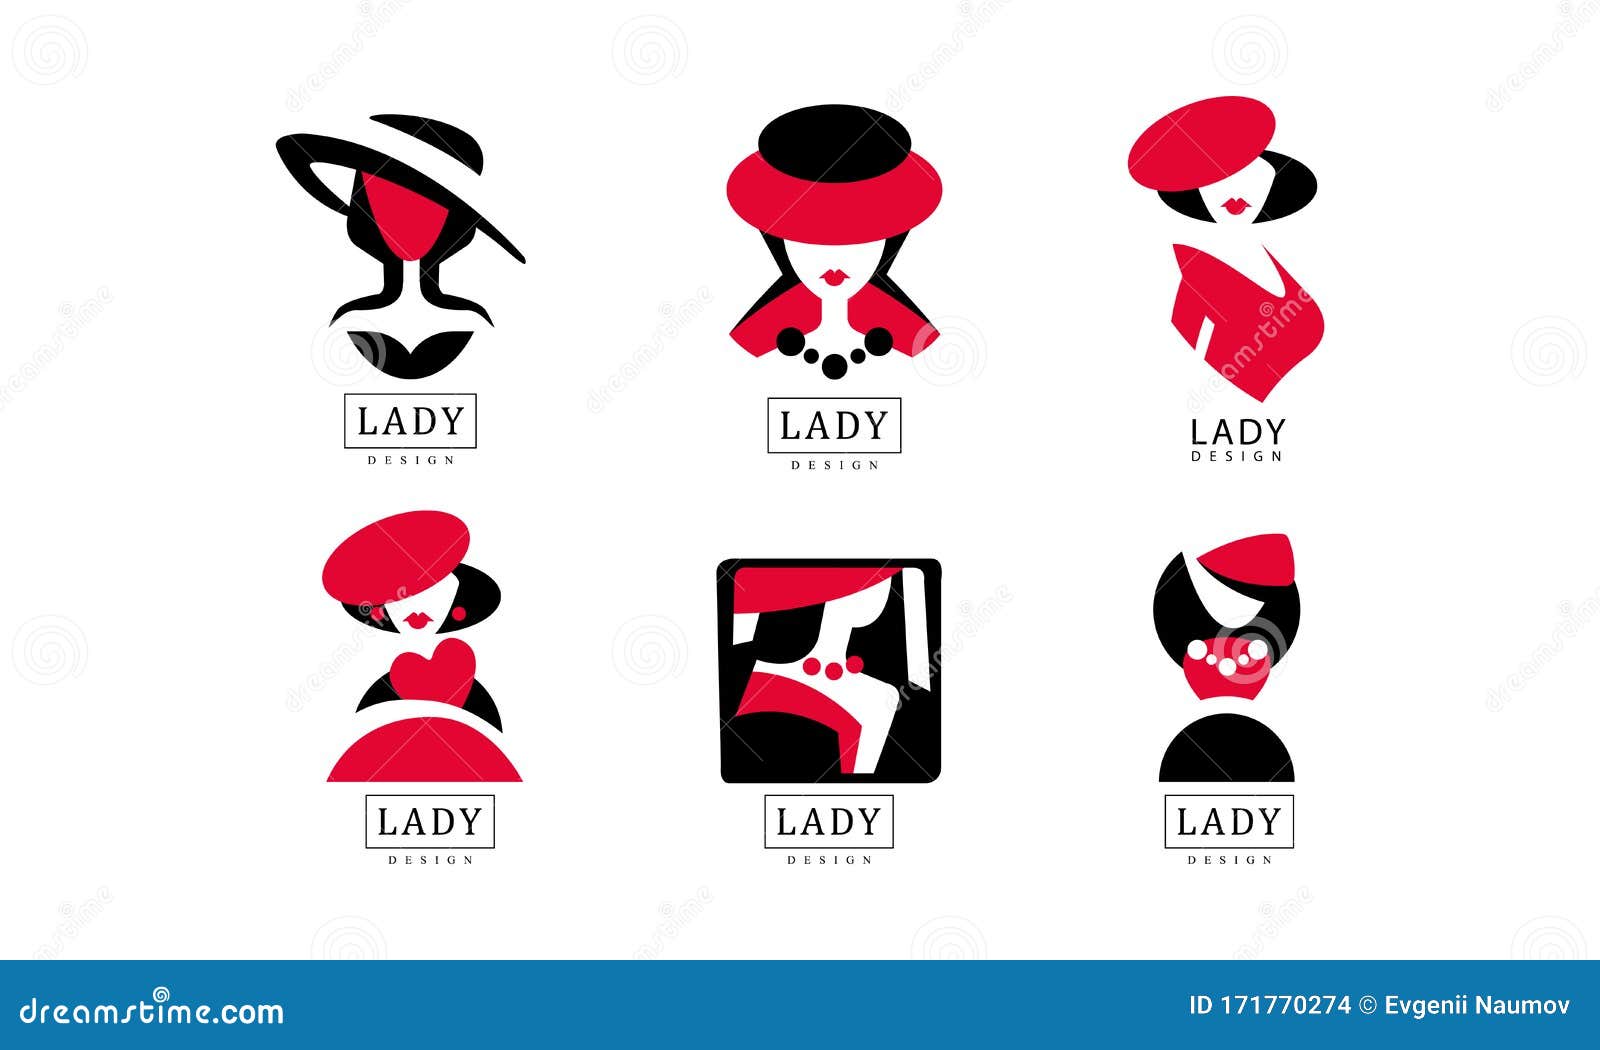 Lady Logo Design Collection Fashion And Beauty Red And Black Emblems Vector Illustration Stock Vector Illustration Of Girl Business